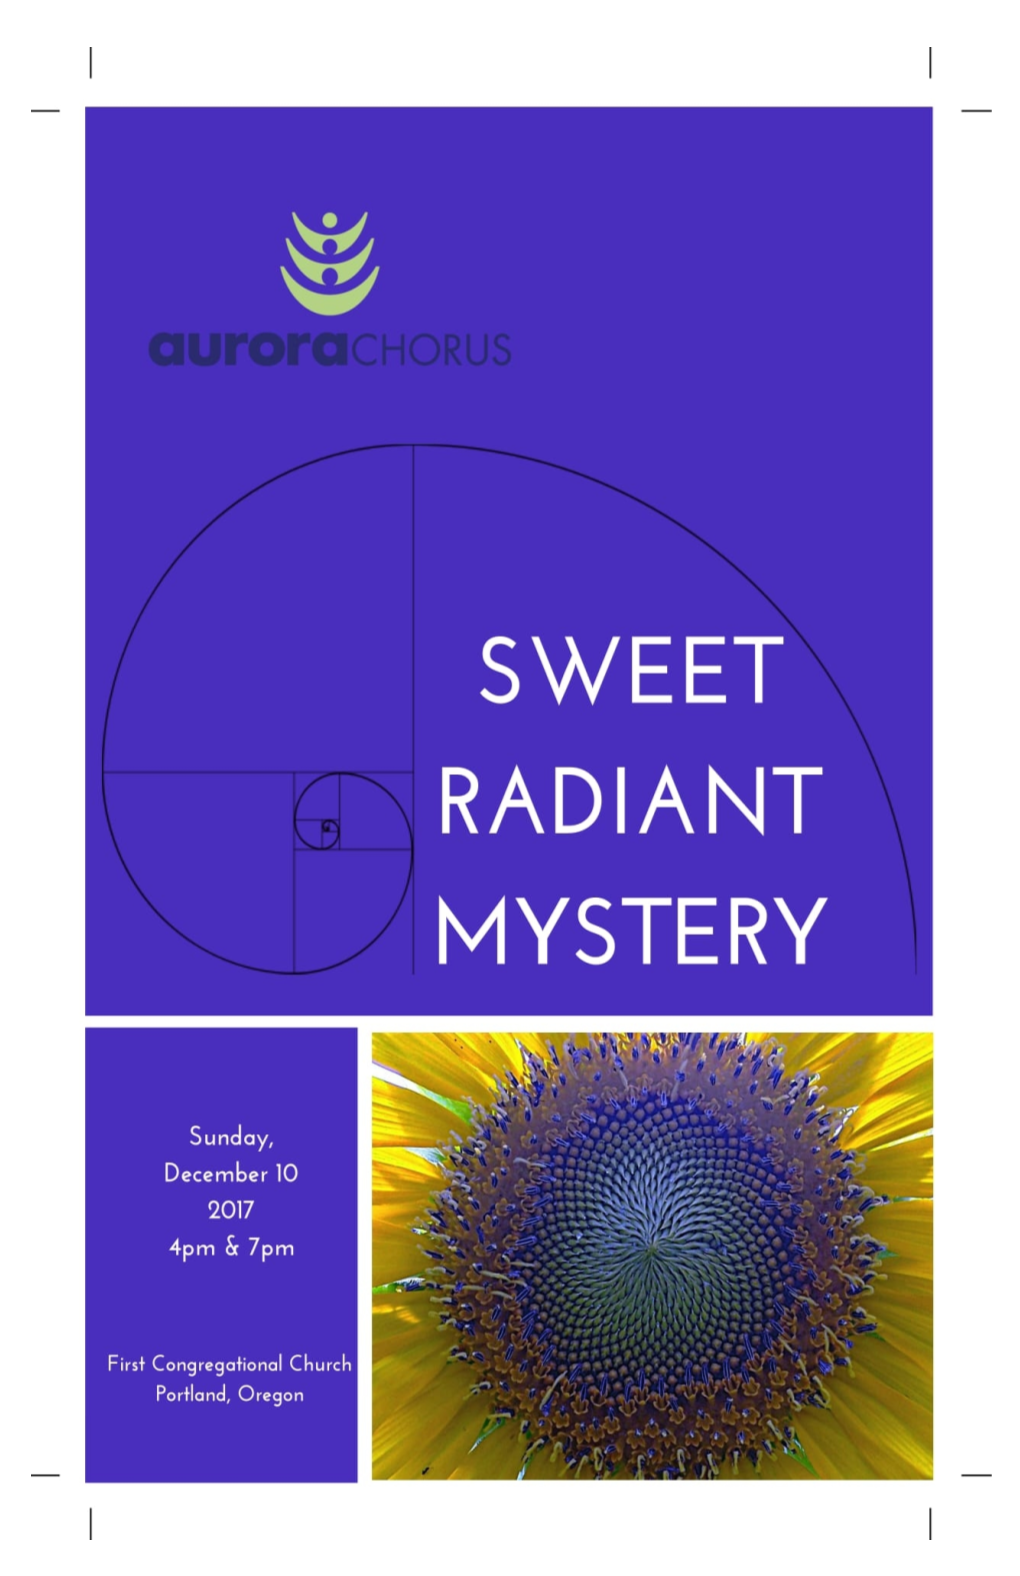 Sweet Radiant Mystery— “Of All That Is and Was and Ever Shall Be” As We Explore Many of the Questions and Proclivities That Connect Us As Members of the Human Family